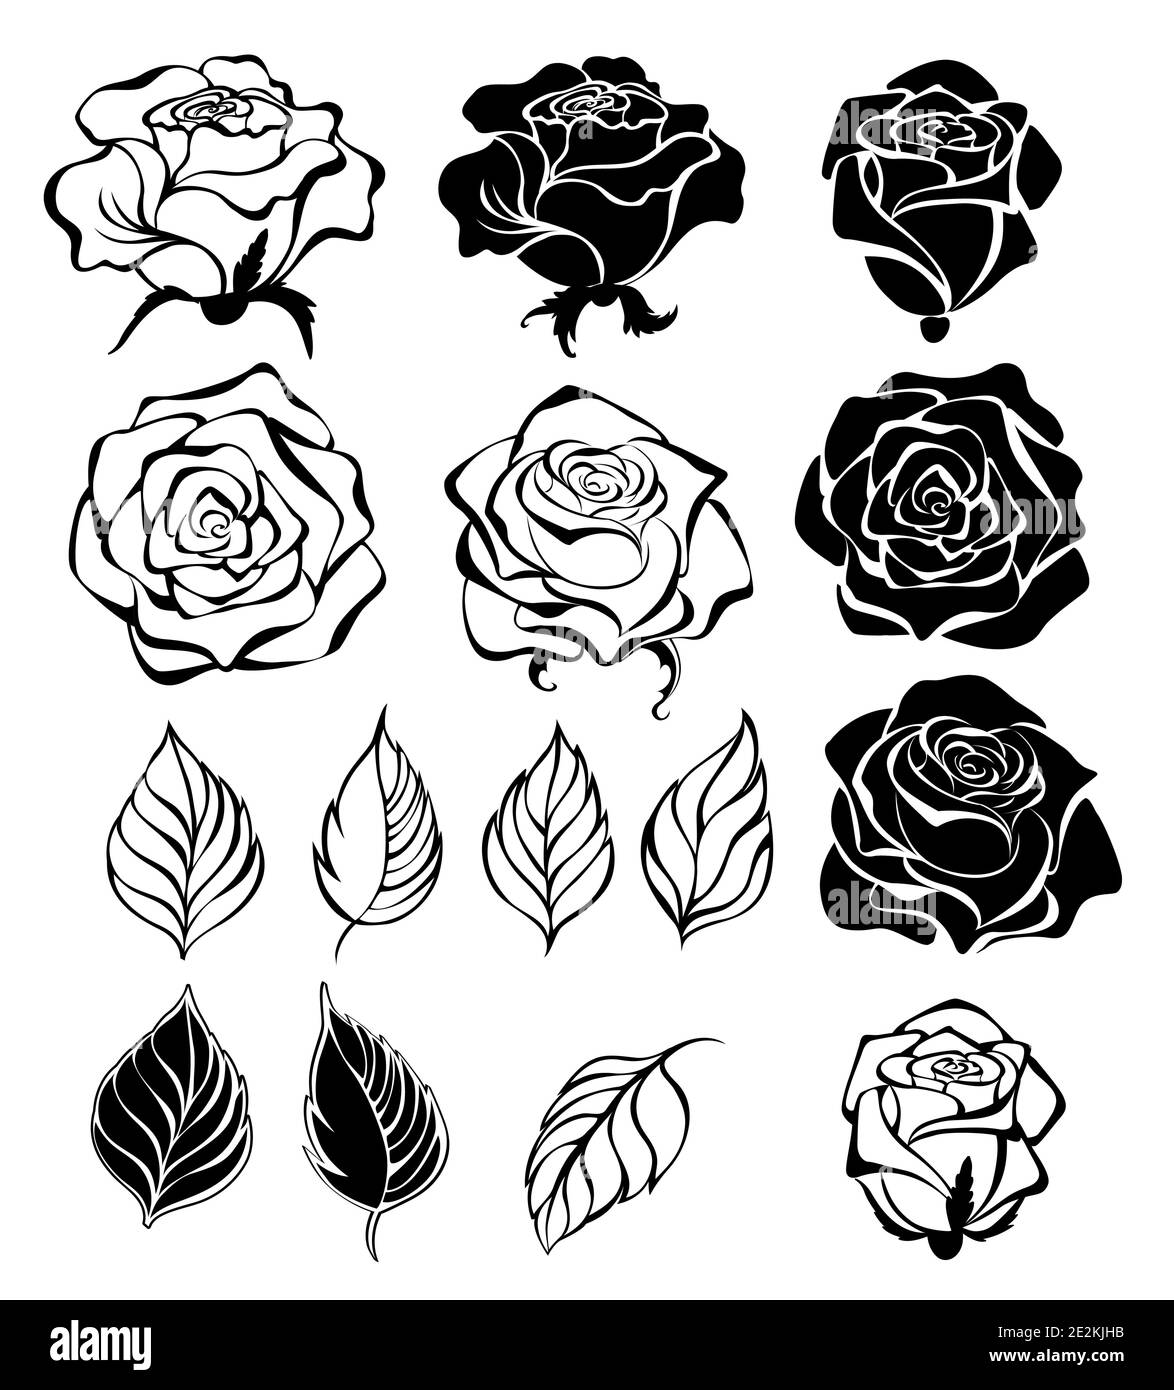 Set of contour, black, silhouette, artistically drawn flowers, buds and leaves of roses, on white background. Stock Vector